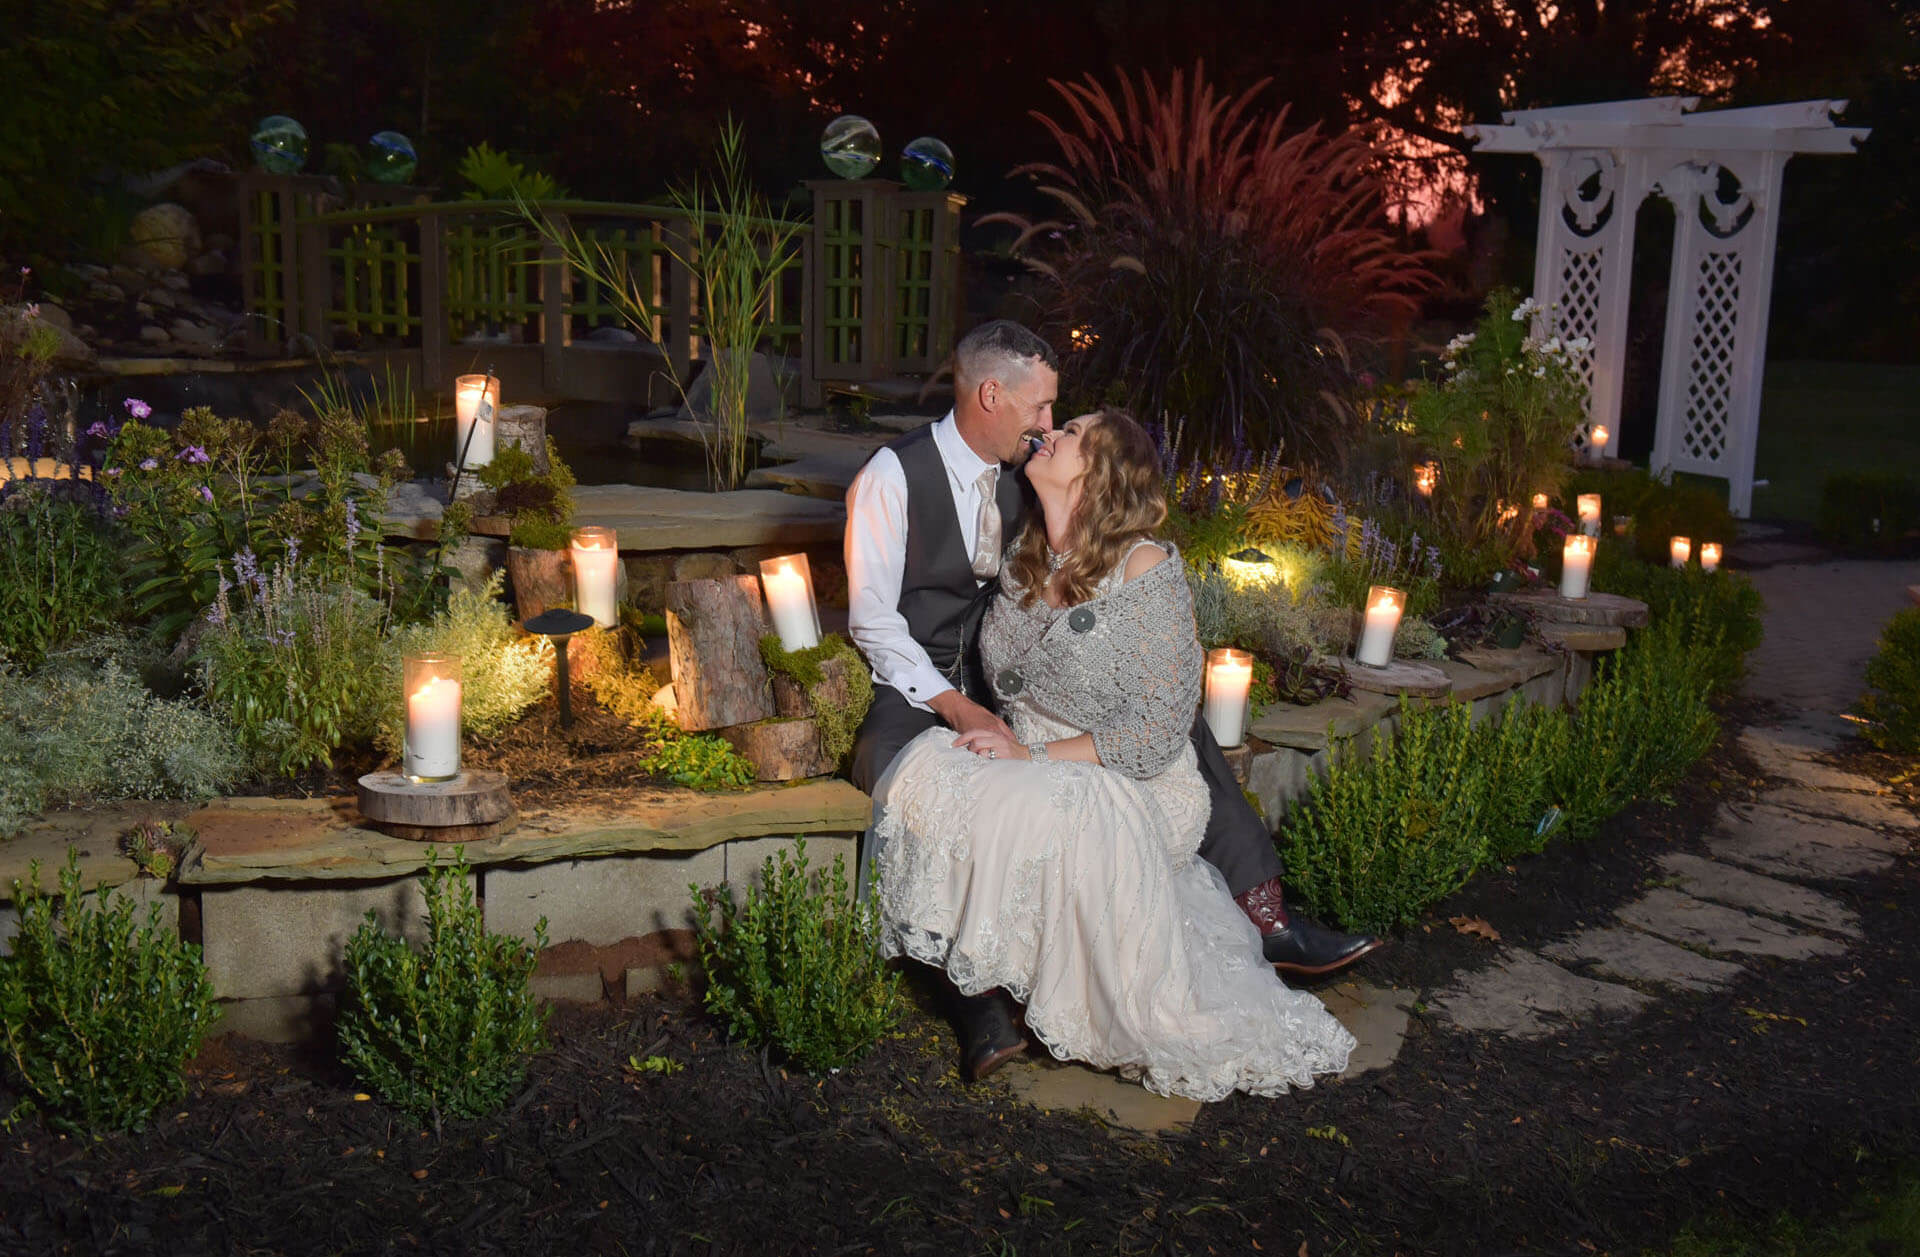 The bride and groom snuggle at the end of their backyard wedding after sunset near Metro Detroit, Michigan.